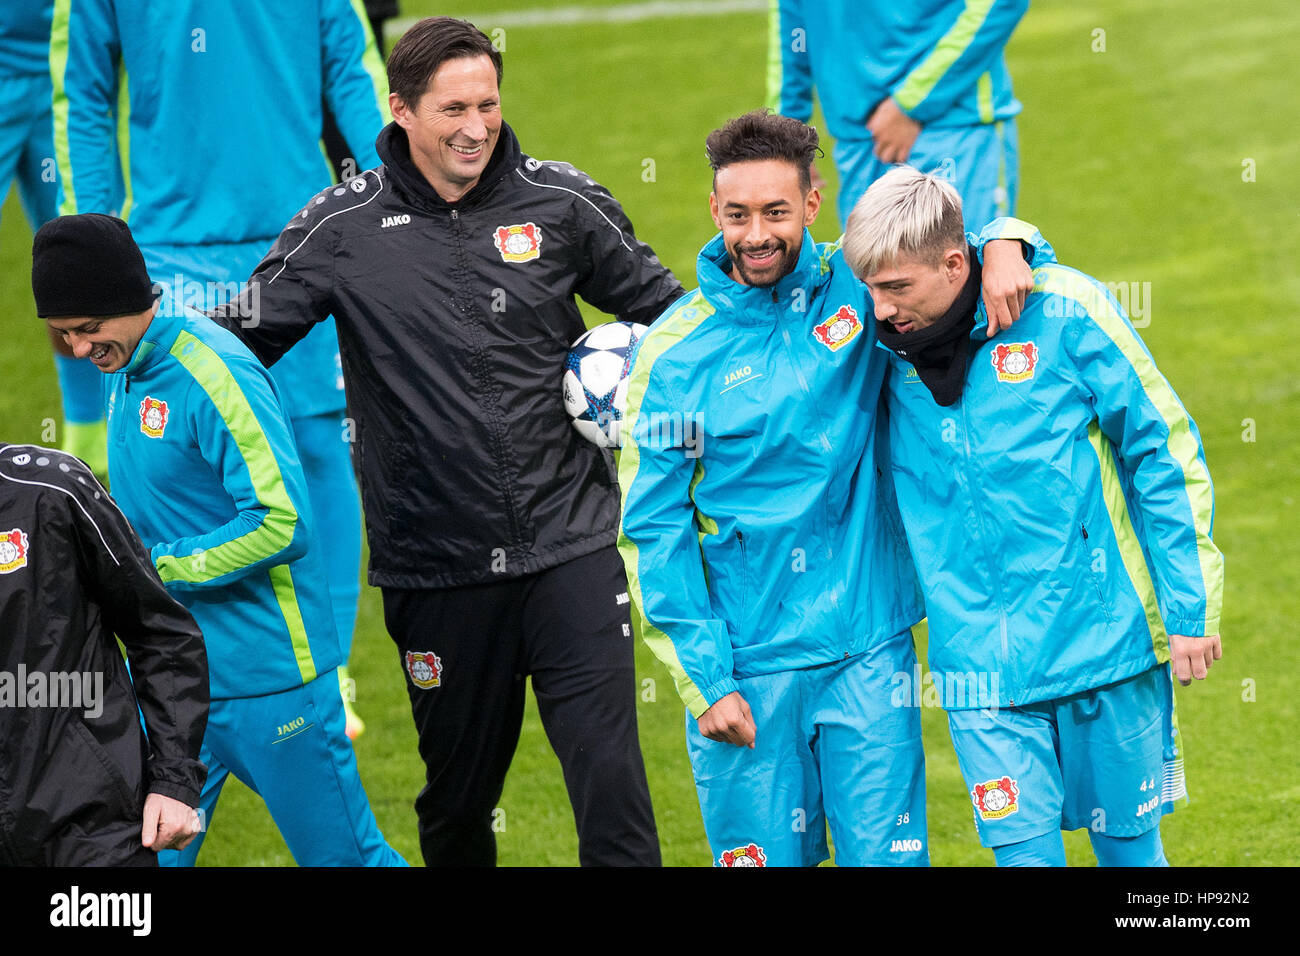 Leverkusen, Germany. 20th Feb, 2017. Javier Hernandez (L-R), headcoach Roger Schmidt, Karim Bellarabi and Kevin Kampl laugh during a final training session before the Champions League round of sixteen match on the 21 of February against Atletico Madrid at the BayArena in Leverkusen, Germany, 20 February 2017. Photo: Marius Becker/dpa/Alamy Live News Stock Photo